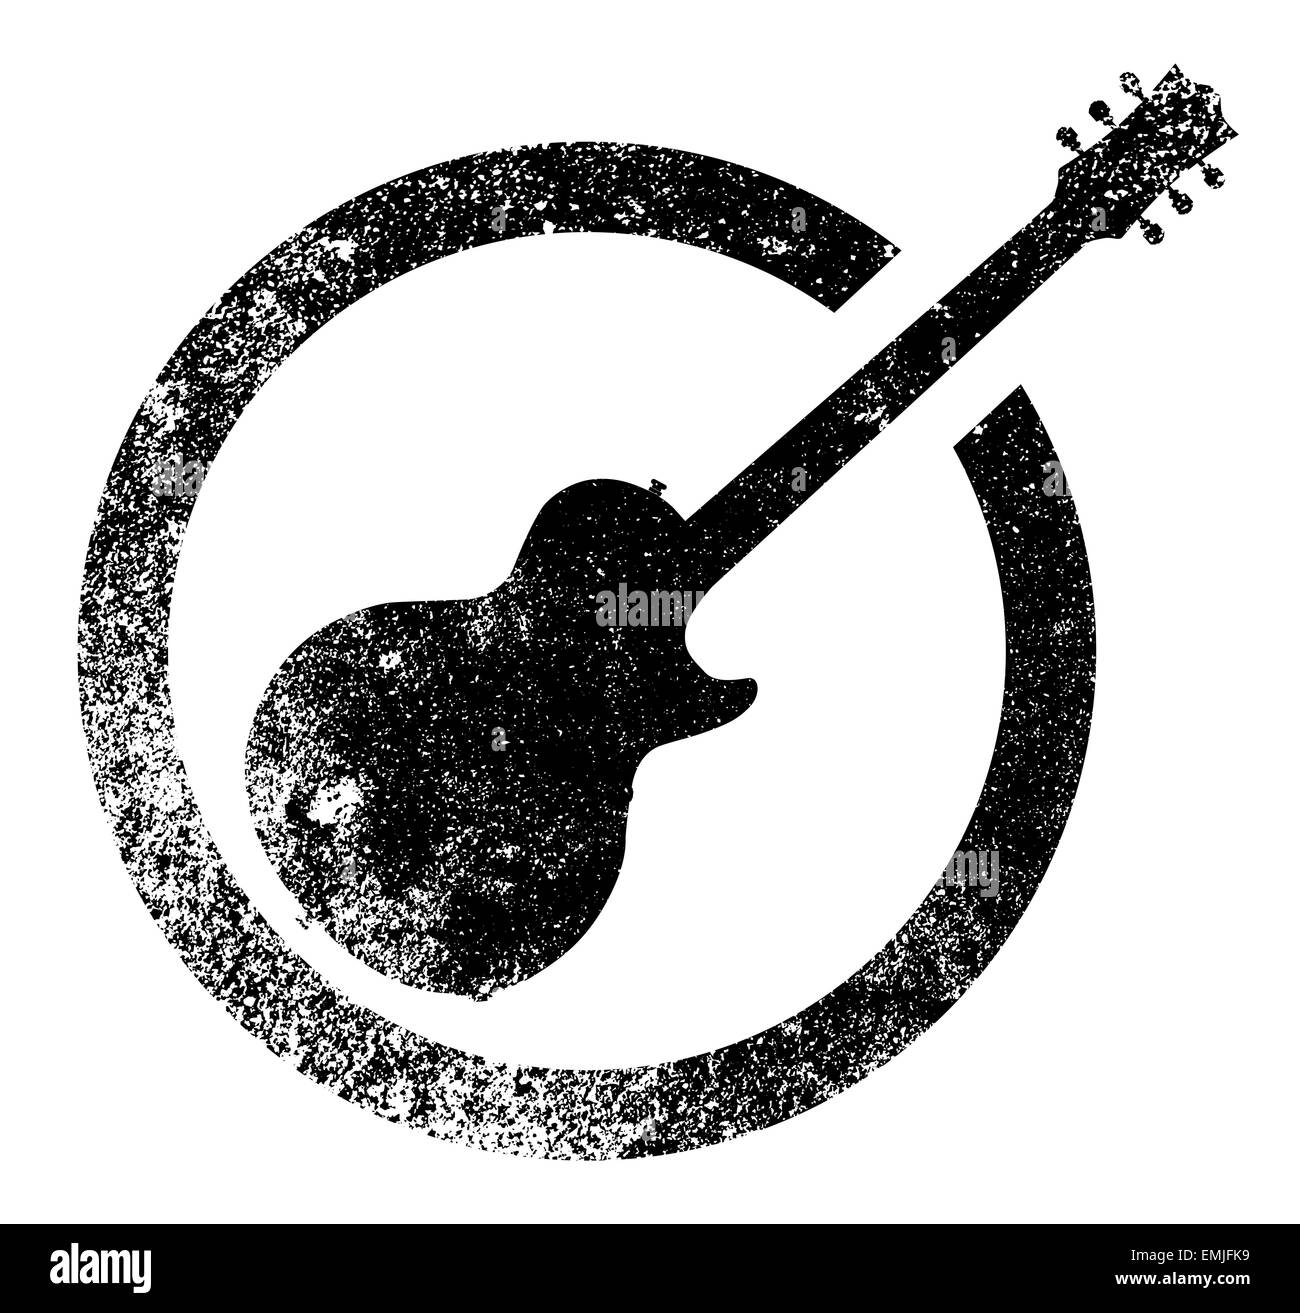 The definitive rock and roll guitar in black, isolated over a white background. Stock Photo